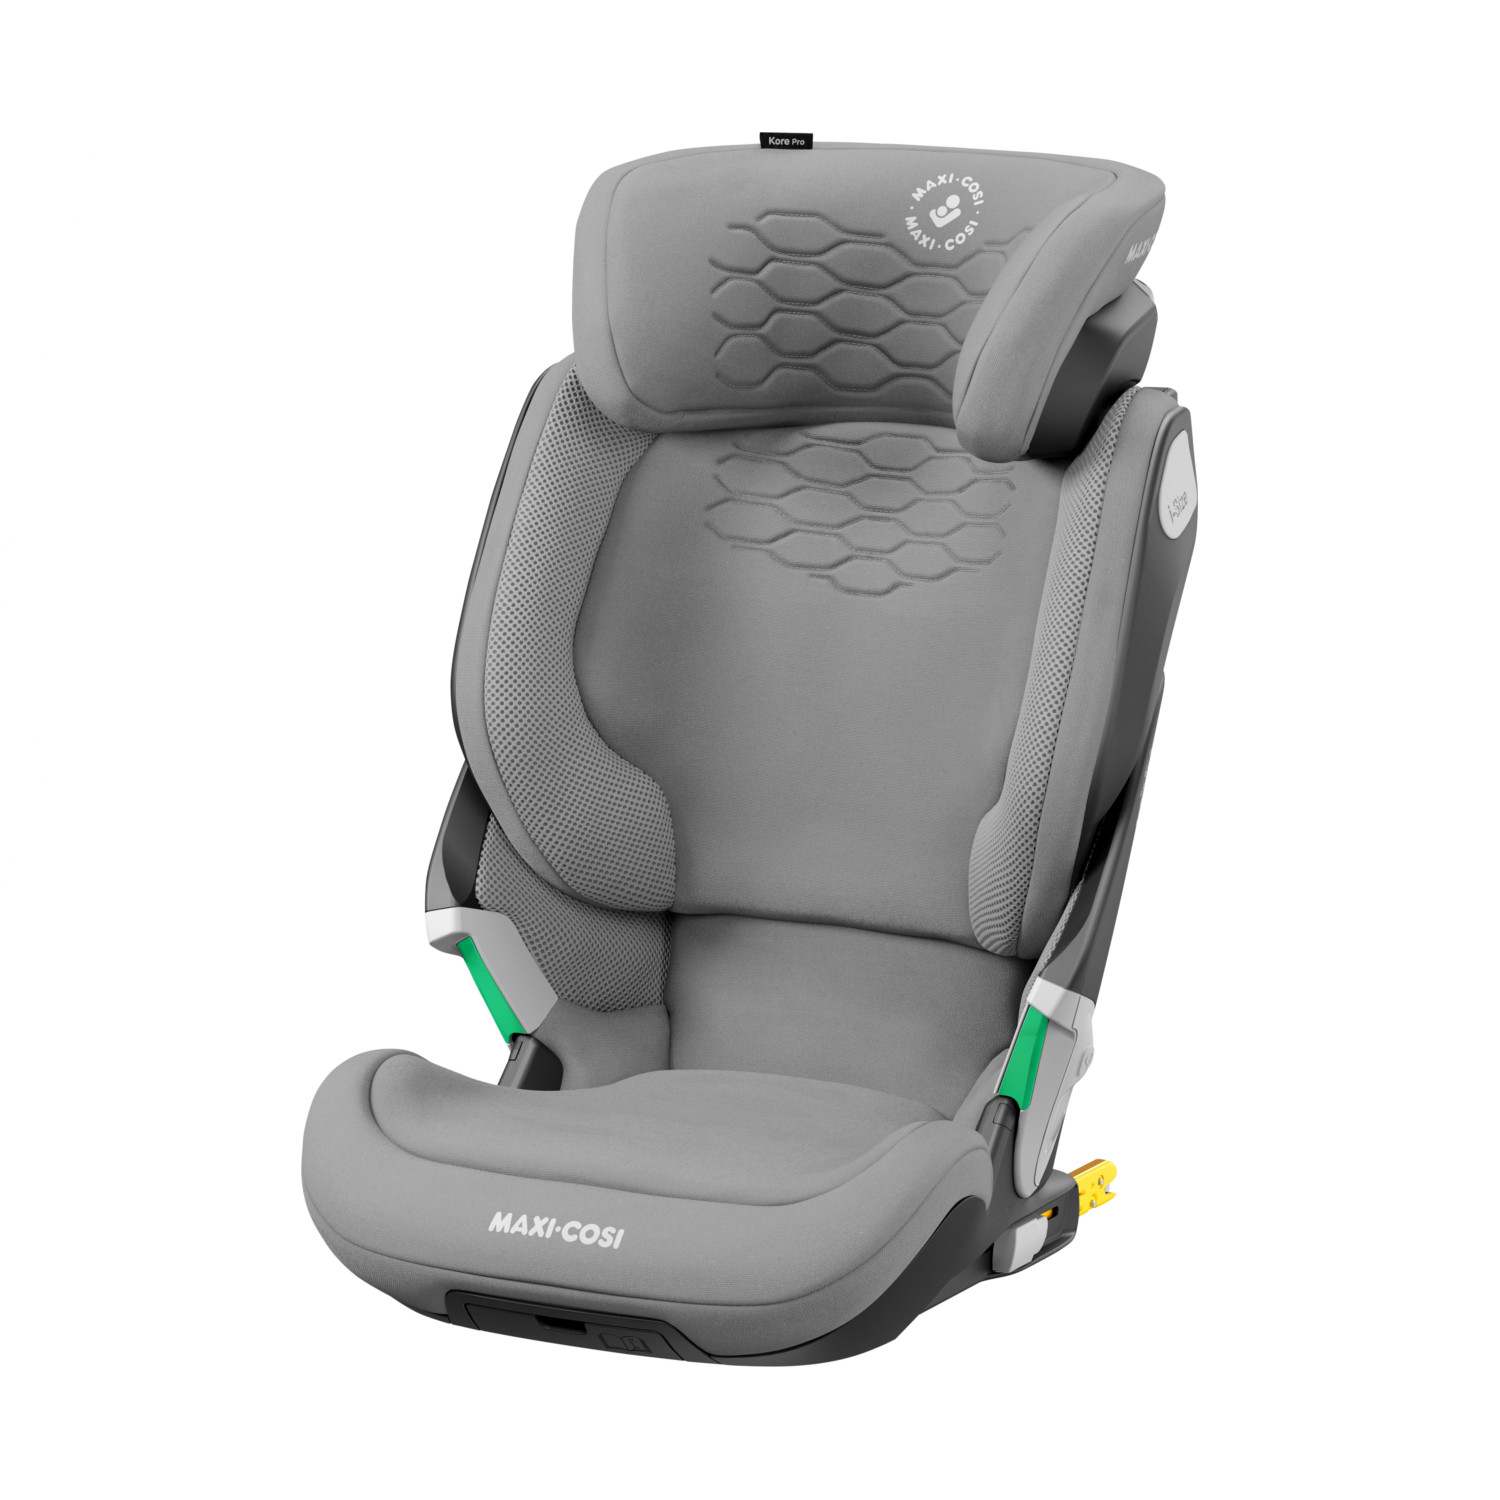 hospita Competitief Mand Order the Maxi-Cosi Kore Pro i-Size Car Seat online - Baby Plus